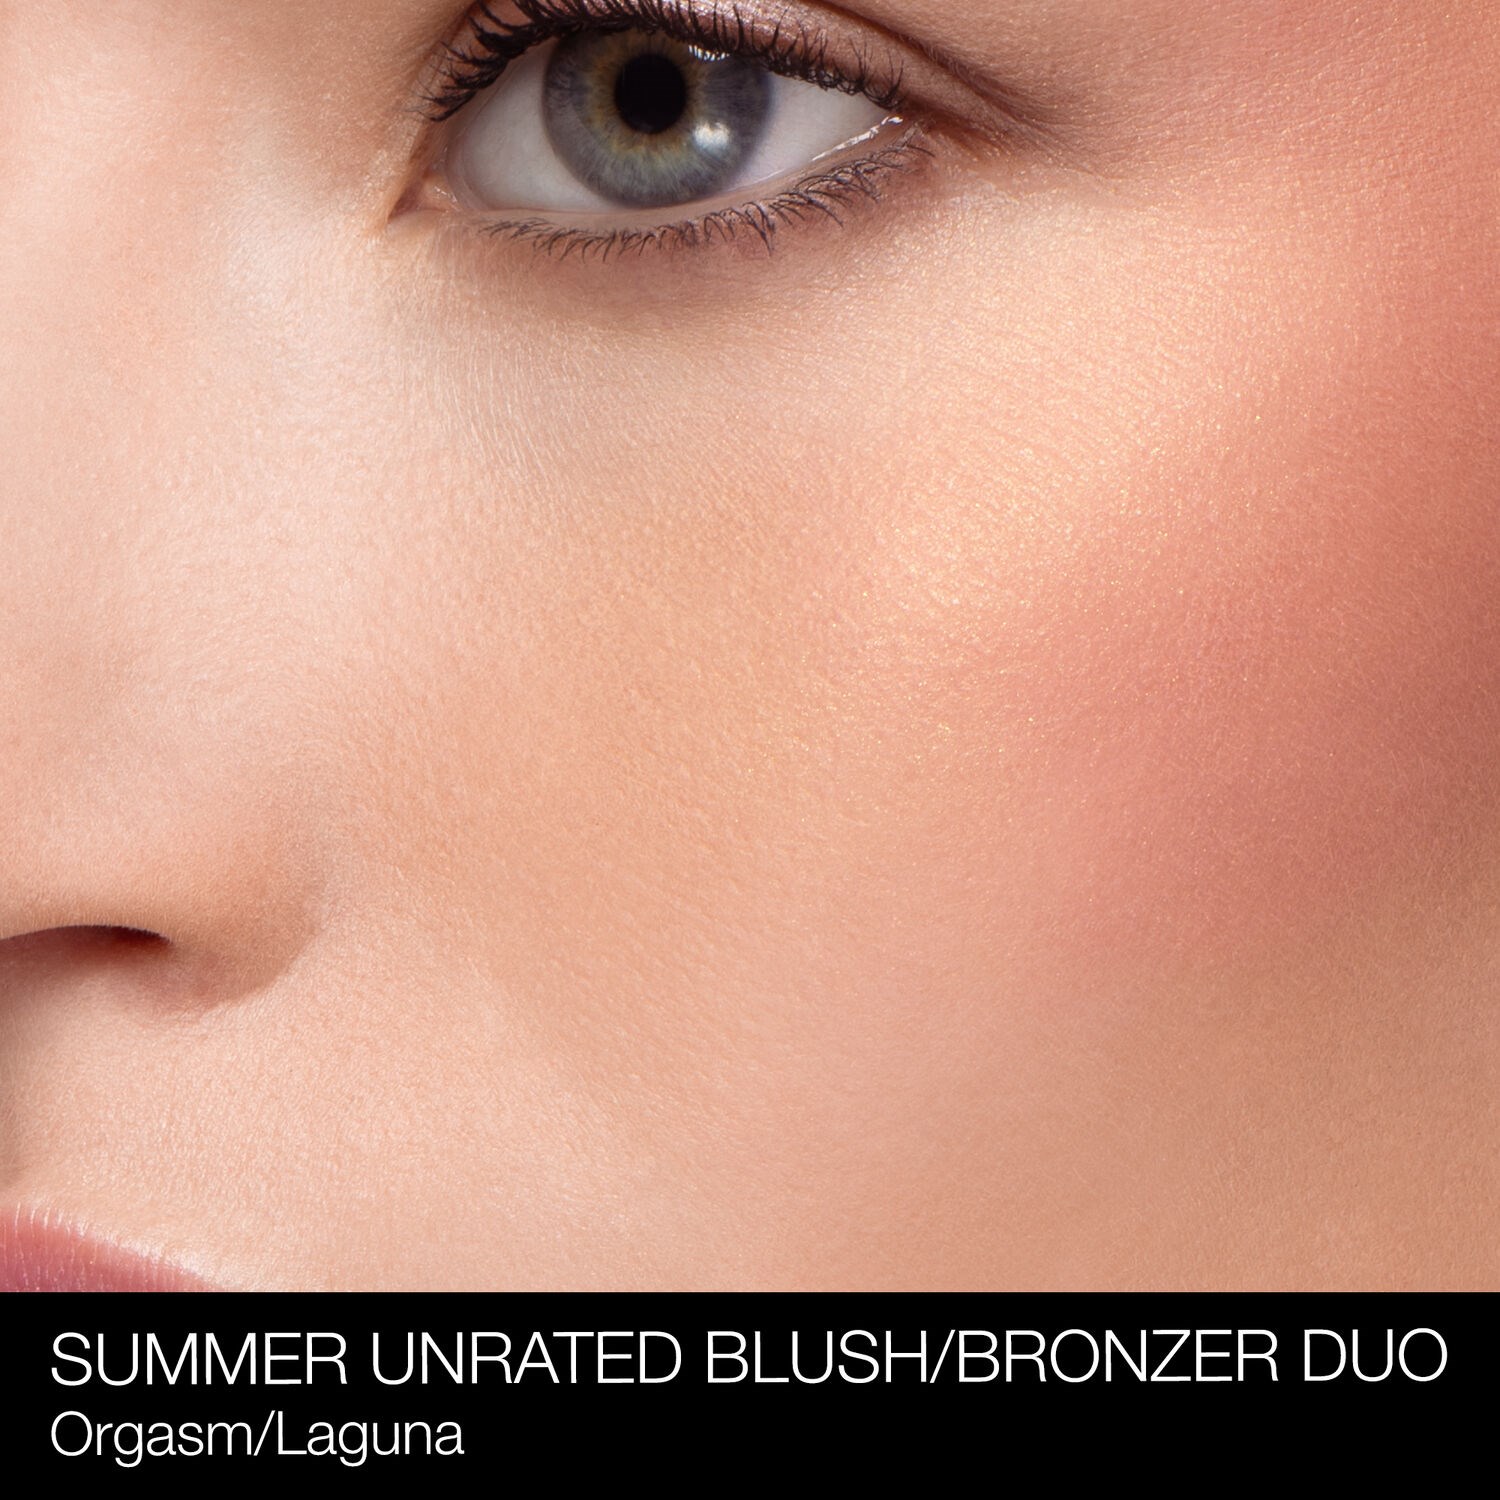 SUMMER UNRATED BLUSH/BRONZER DUO 4